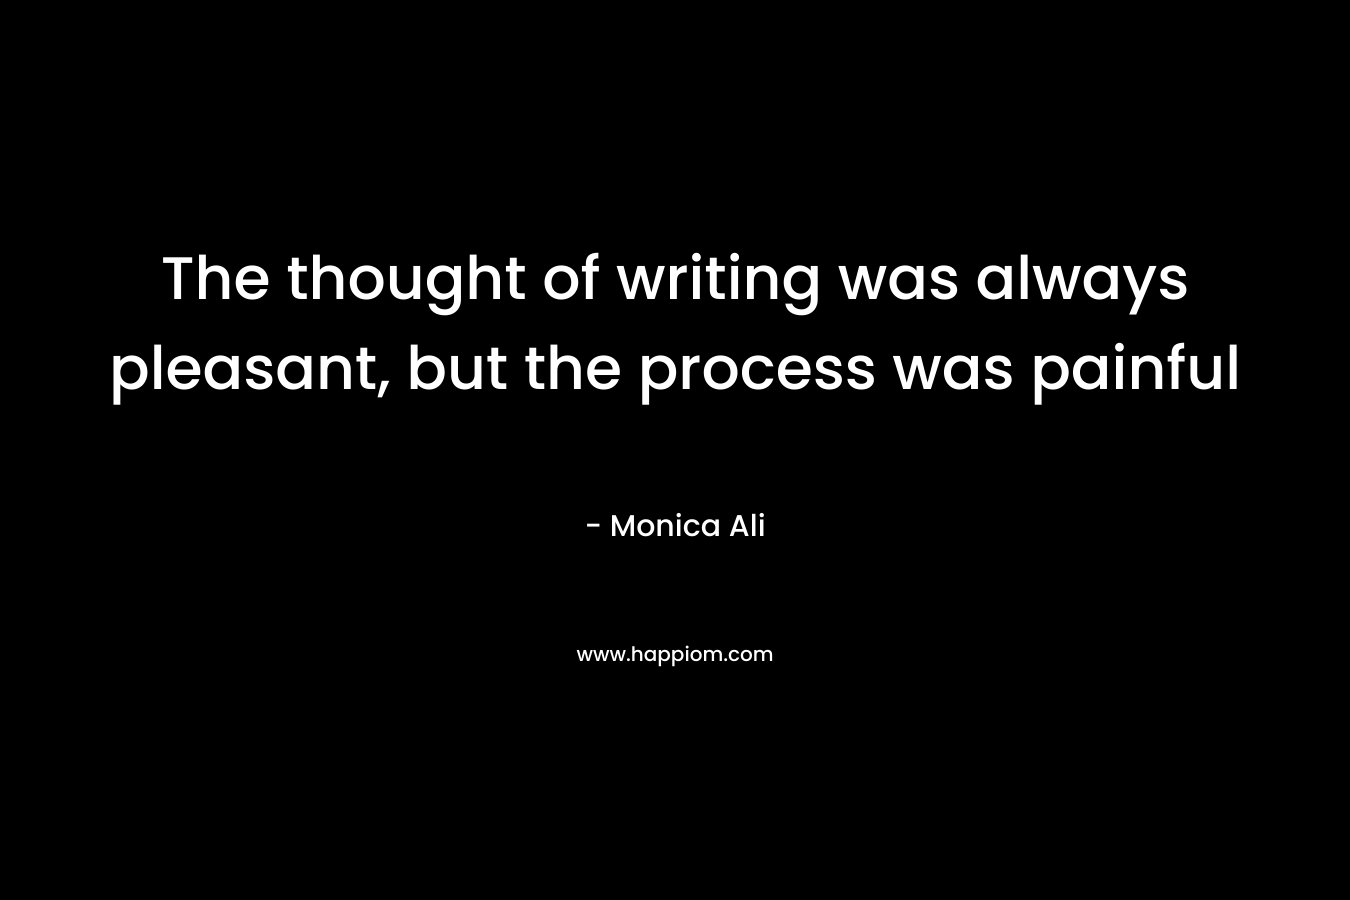 The thought of writing was always pleasant, but the process was painful